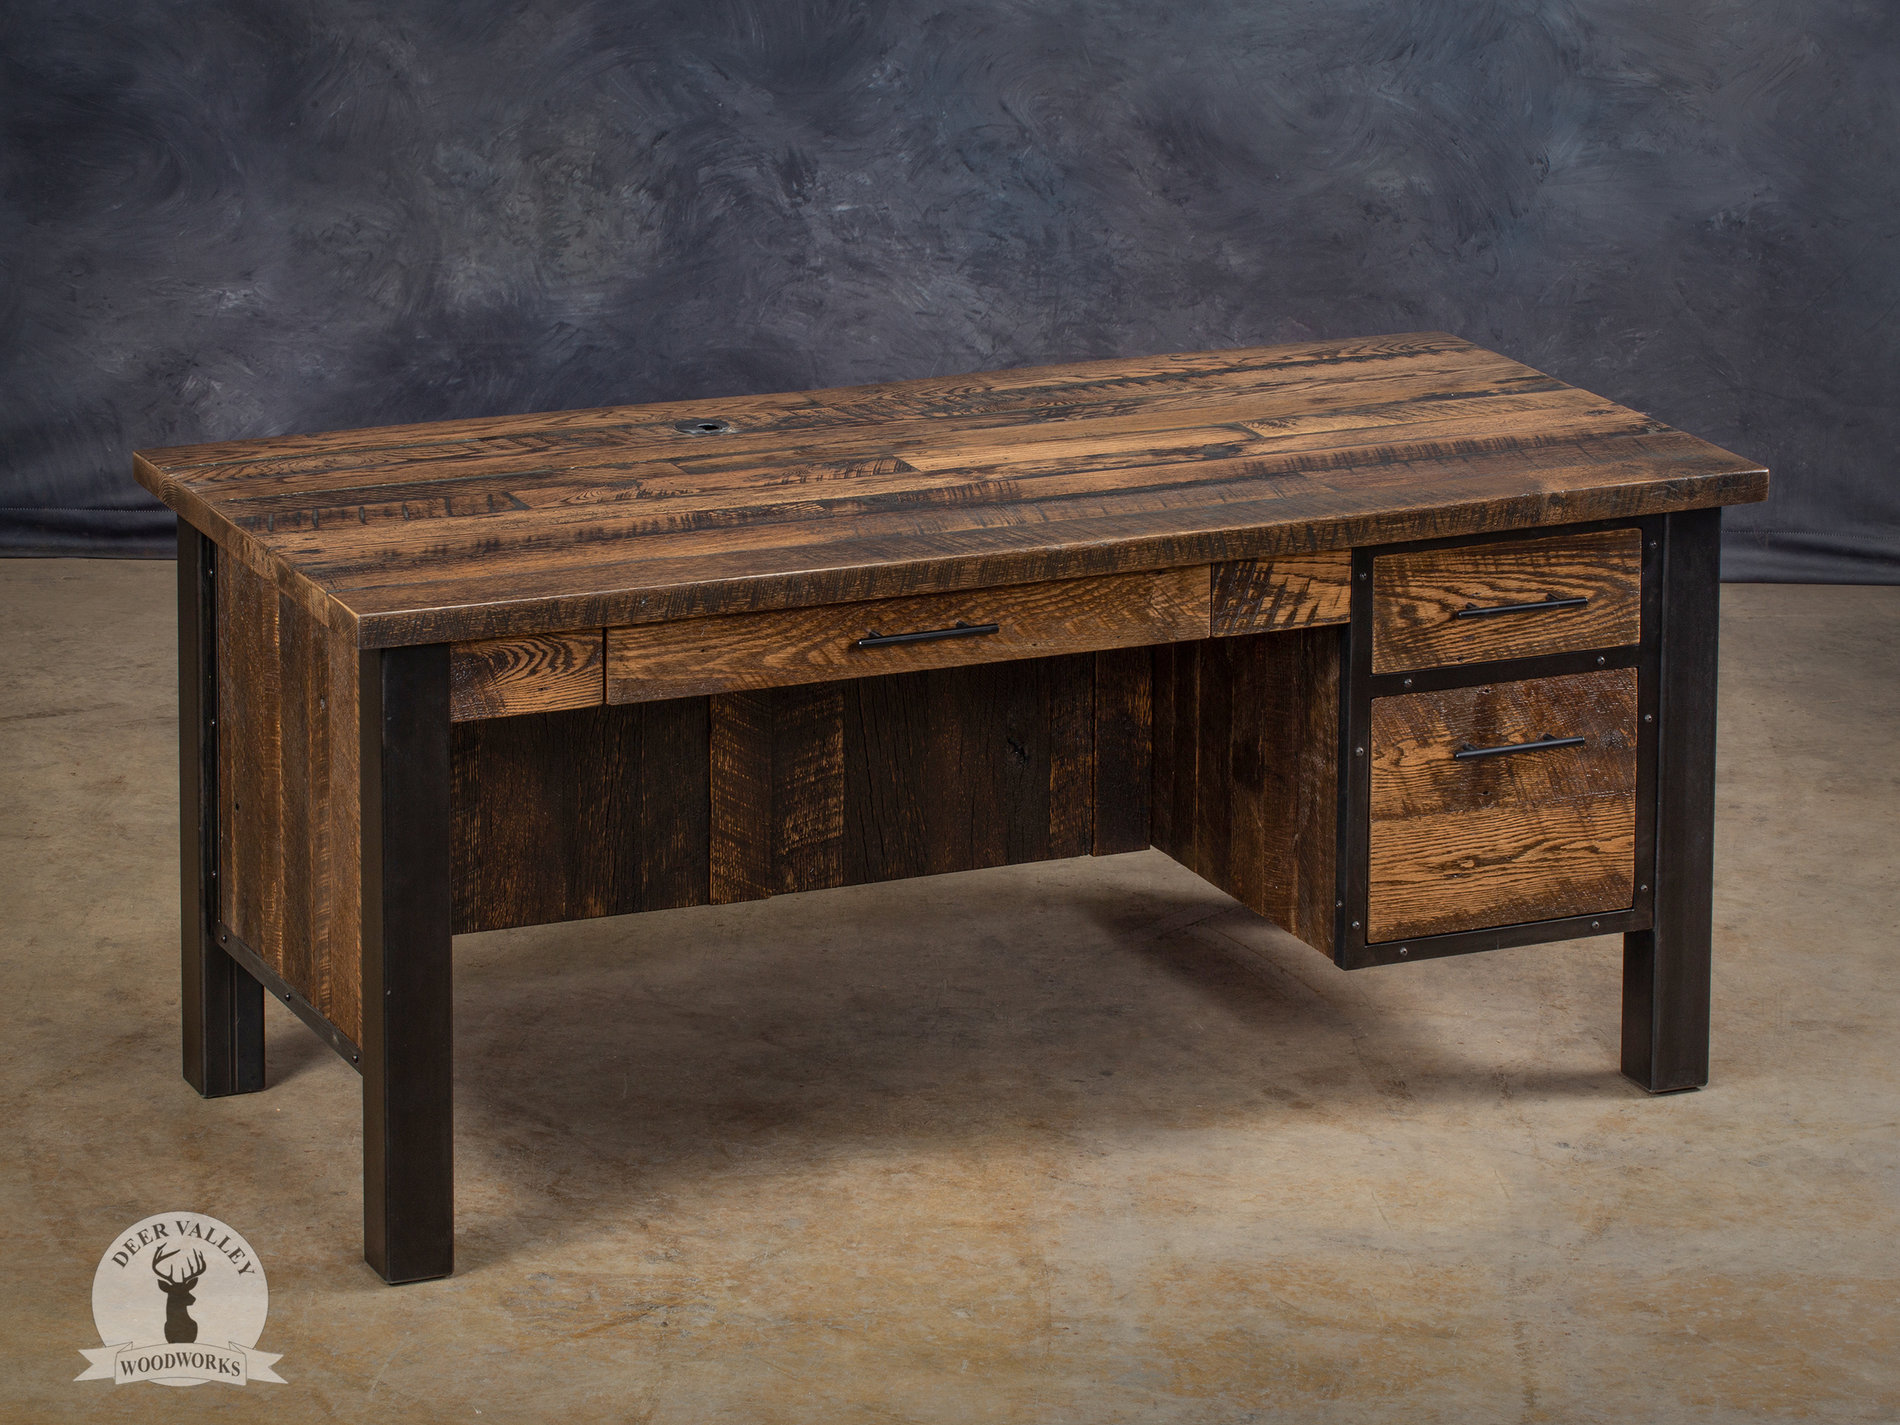 Authentic barnwood executive desk with a Jacobean stained finish, a large desktop, pencil drawer, two drawers, modesty panels, and blackened welded steel frame.